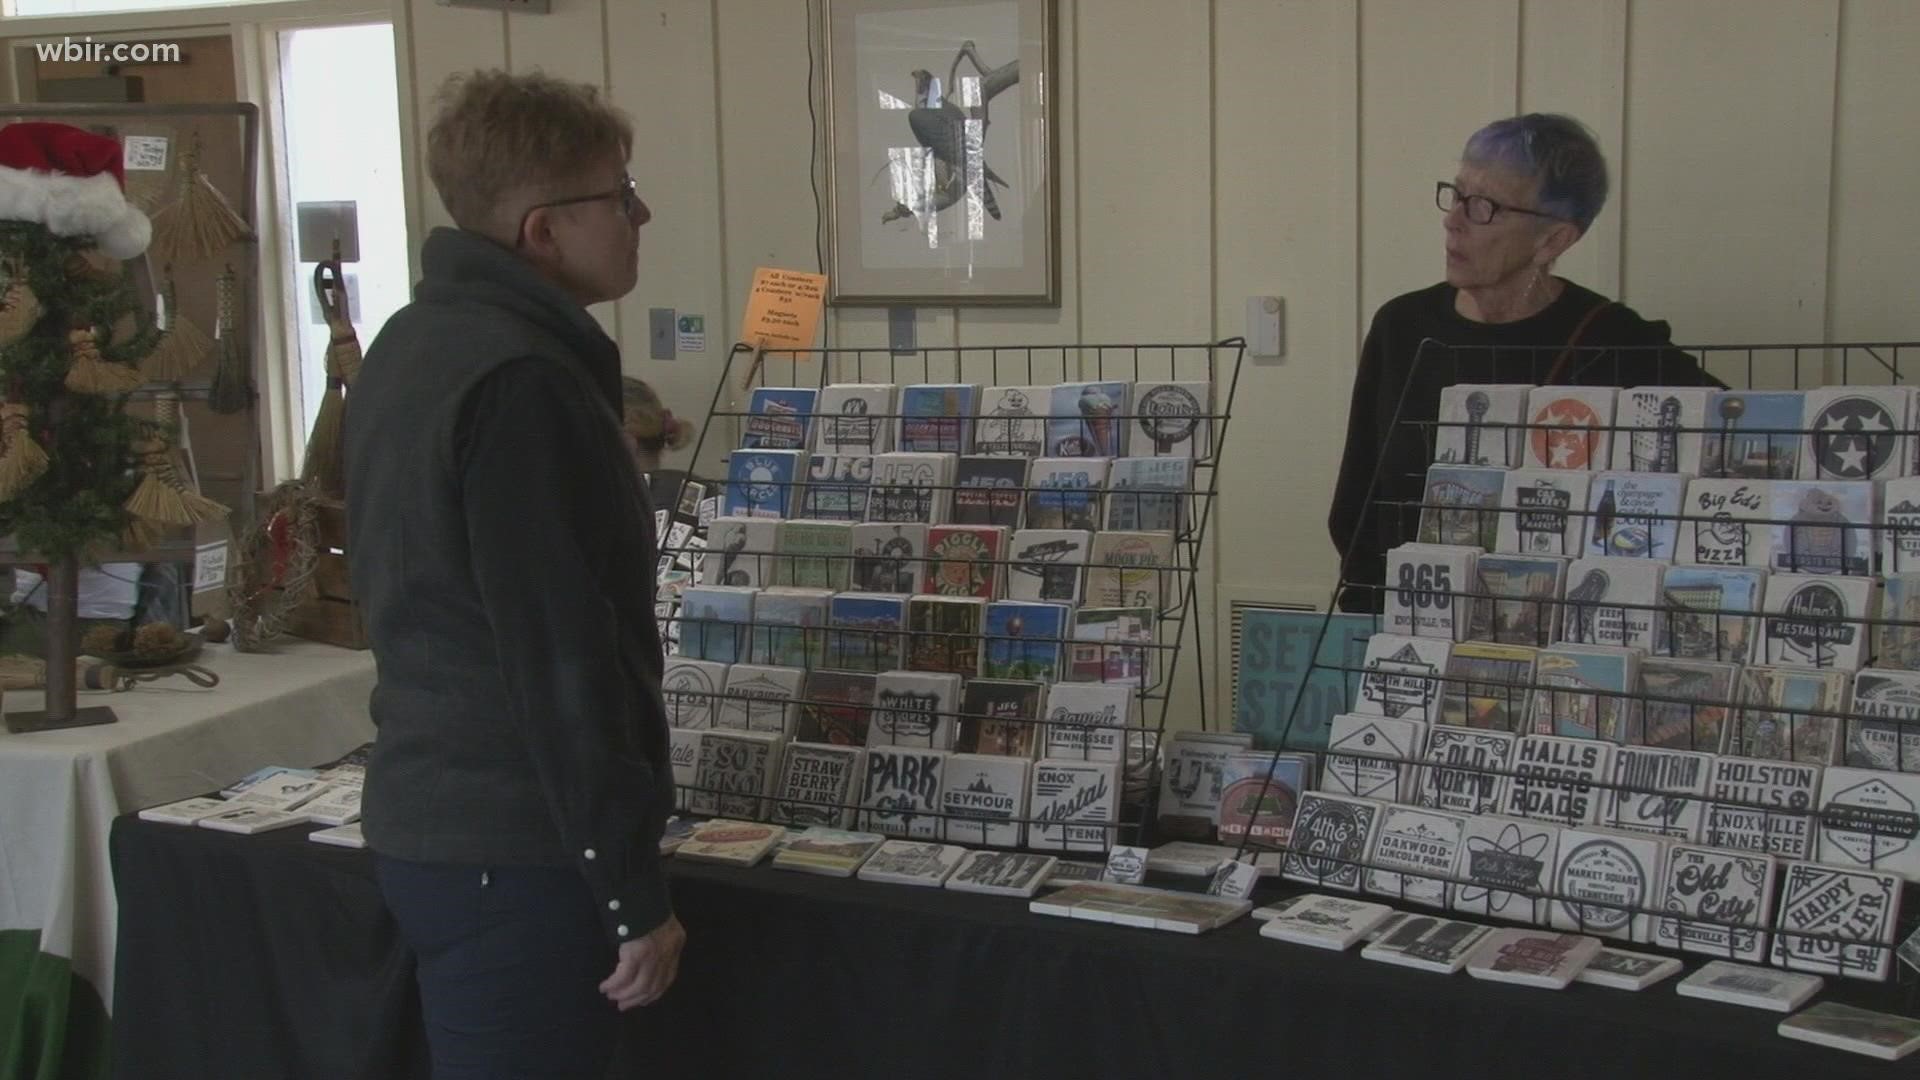 More than 90 vendors are expected to participate in the fair, offering locally-made crafts for people looking to get some holiday shopping done.